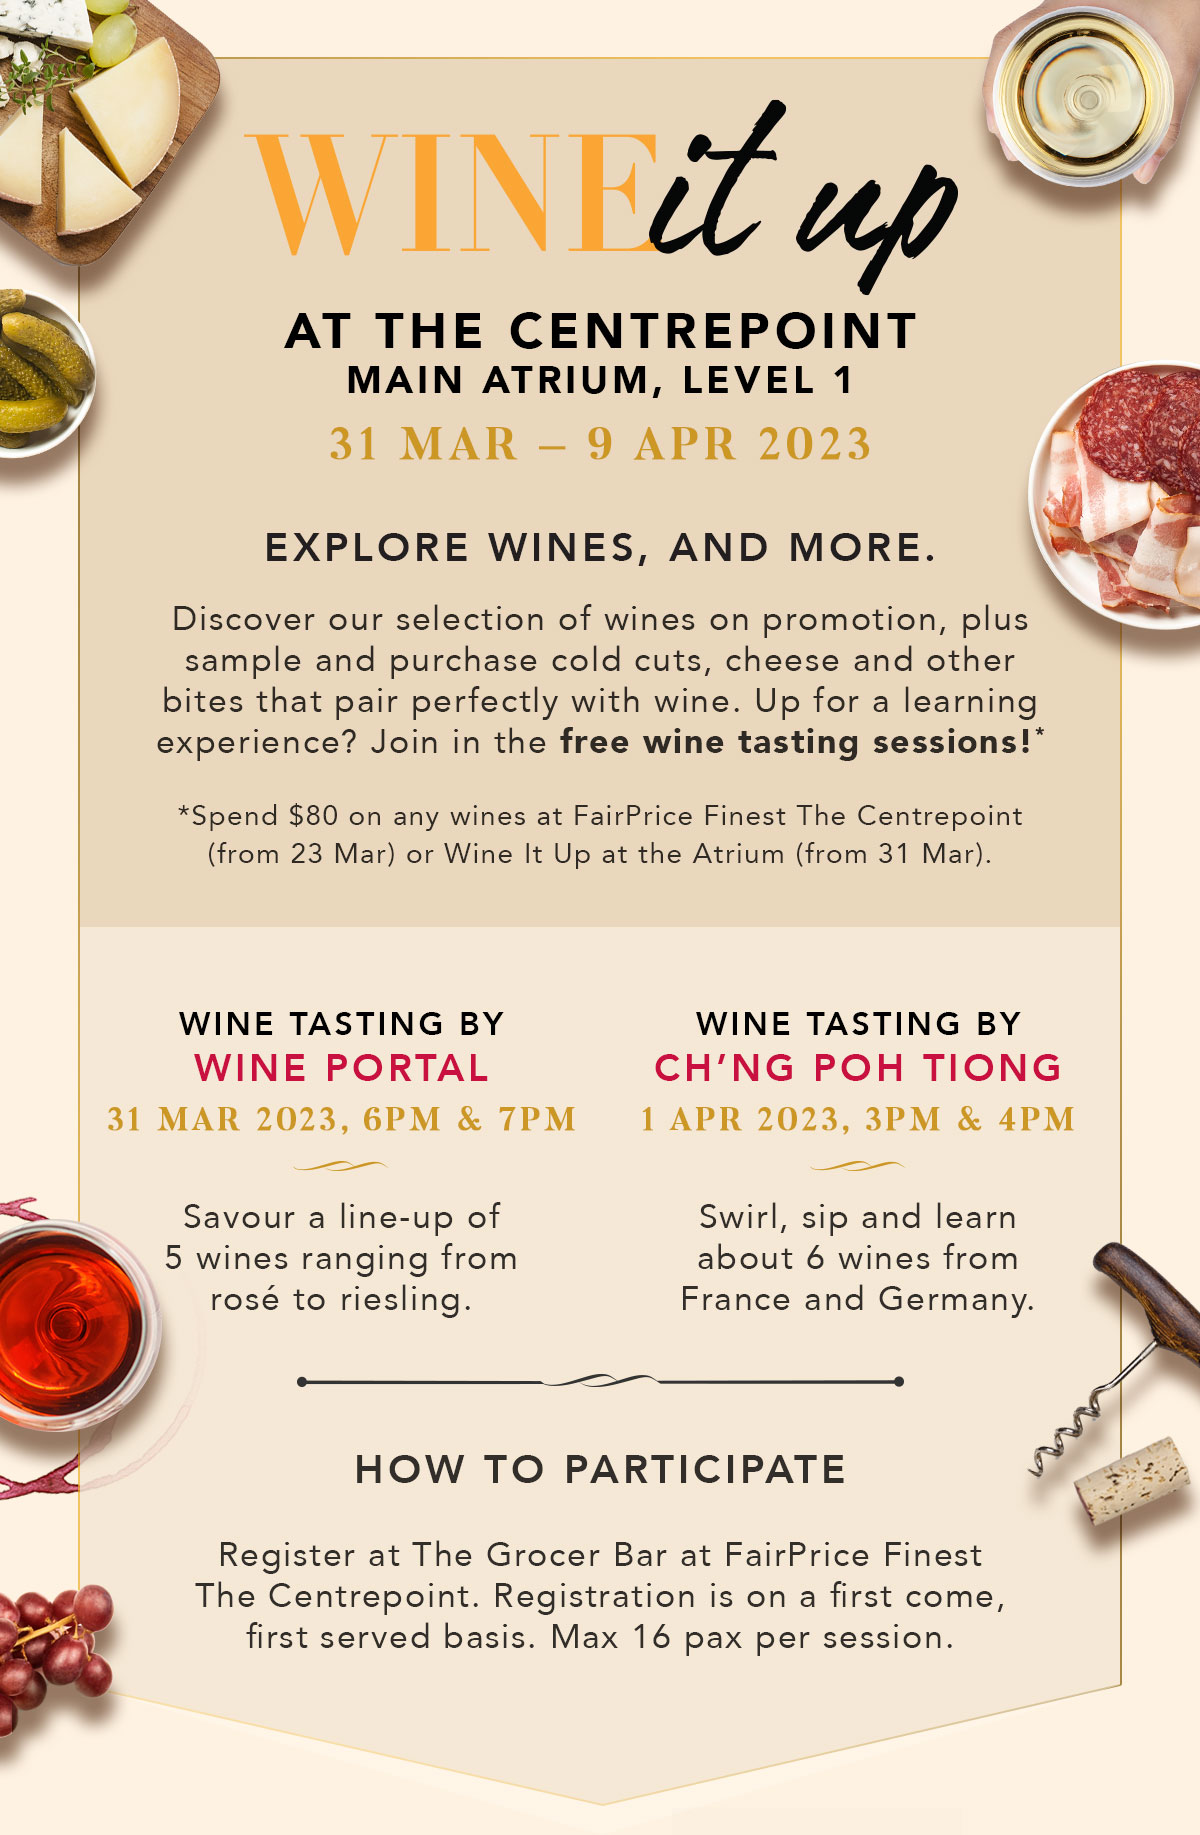 Wine It Up at The Centrepoint Main Atrium, Level 1